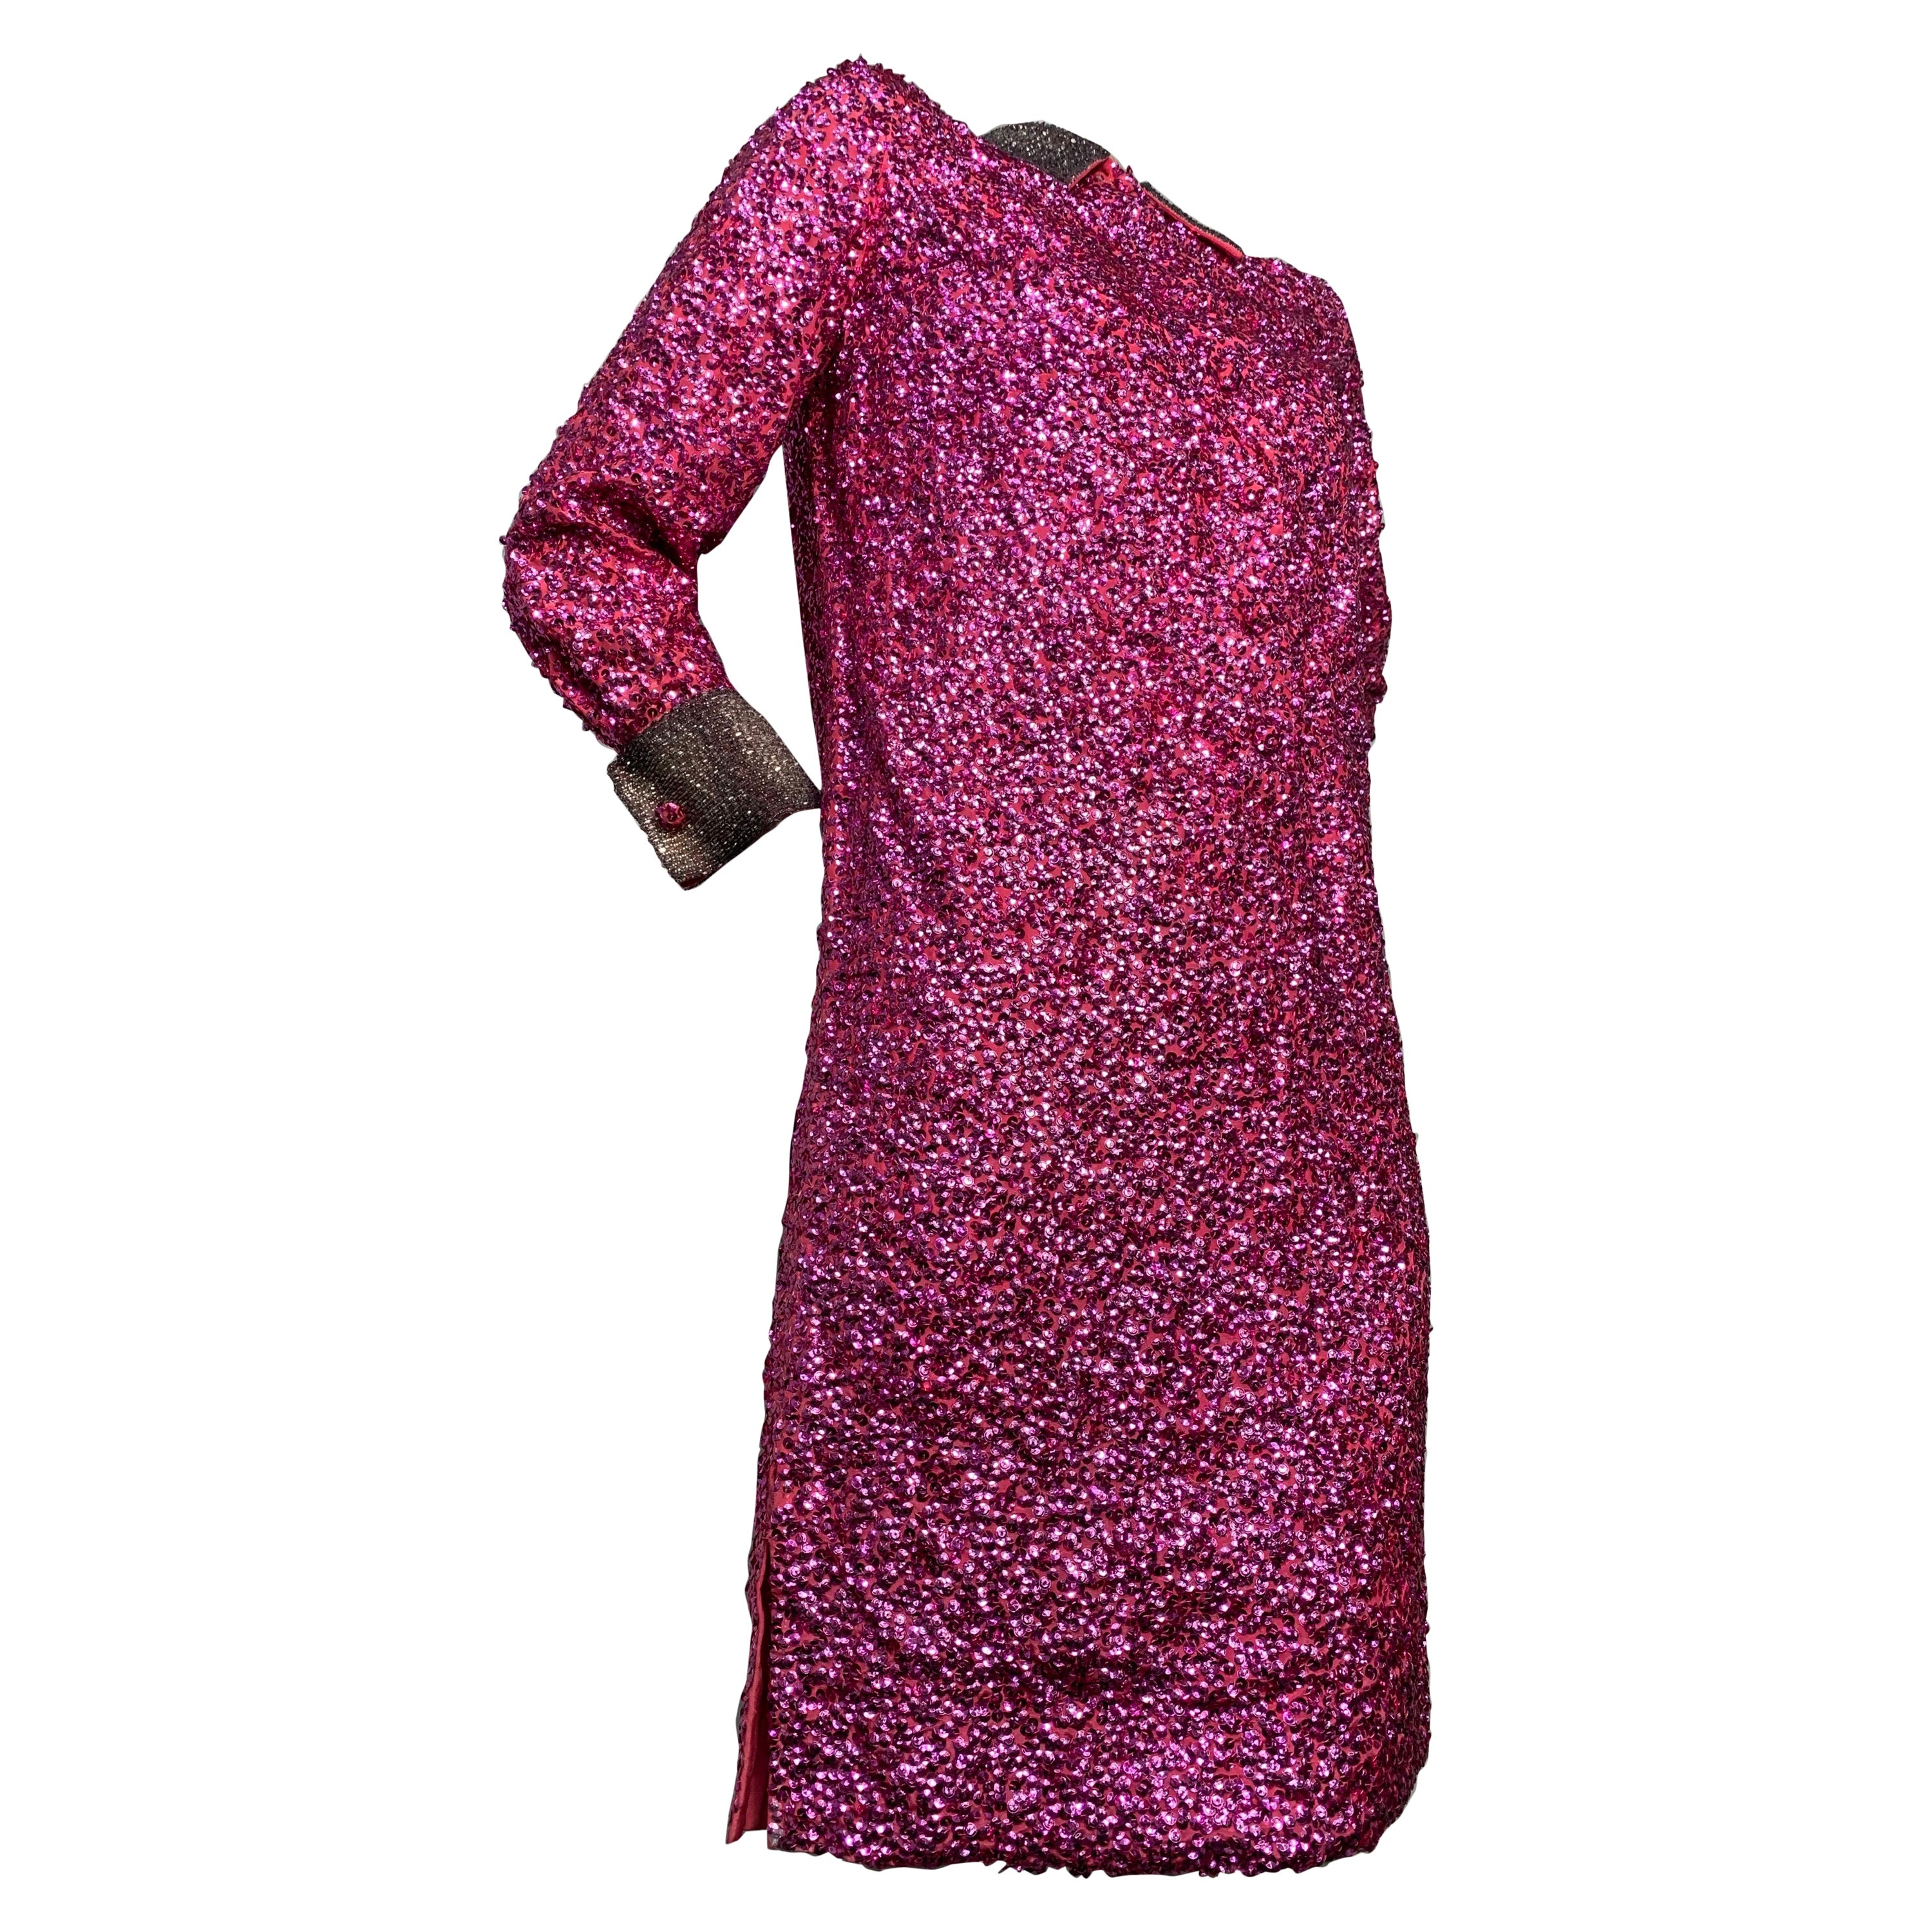 1960s Vivid Fuchsia Sequined Mod Mini Dress w/ Silver Beaded Collar and Cuffs For Sale